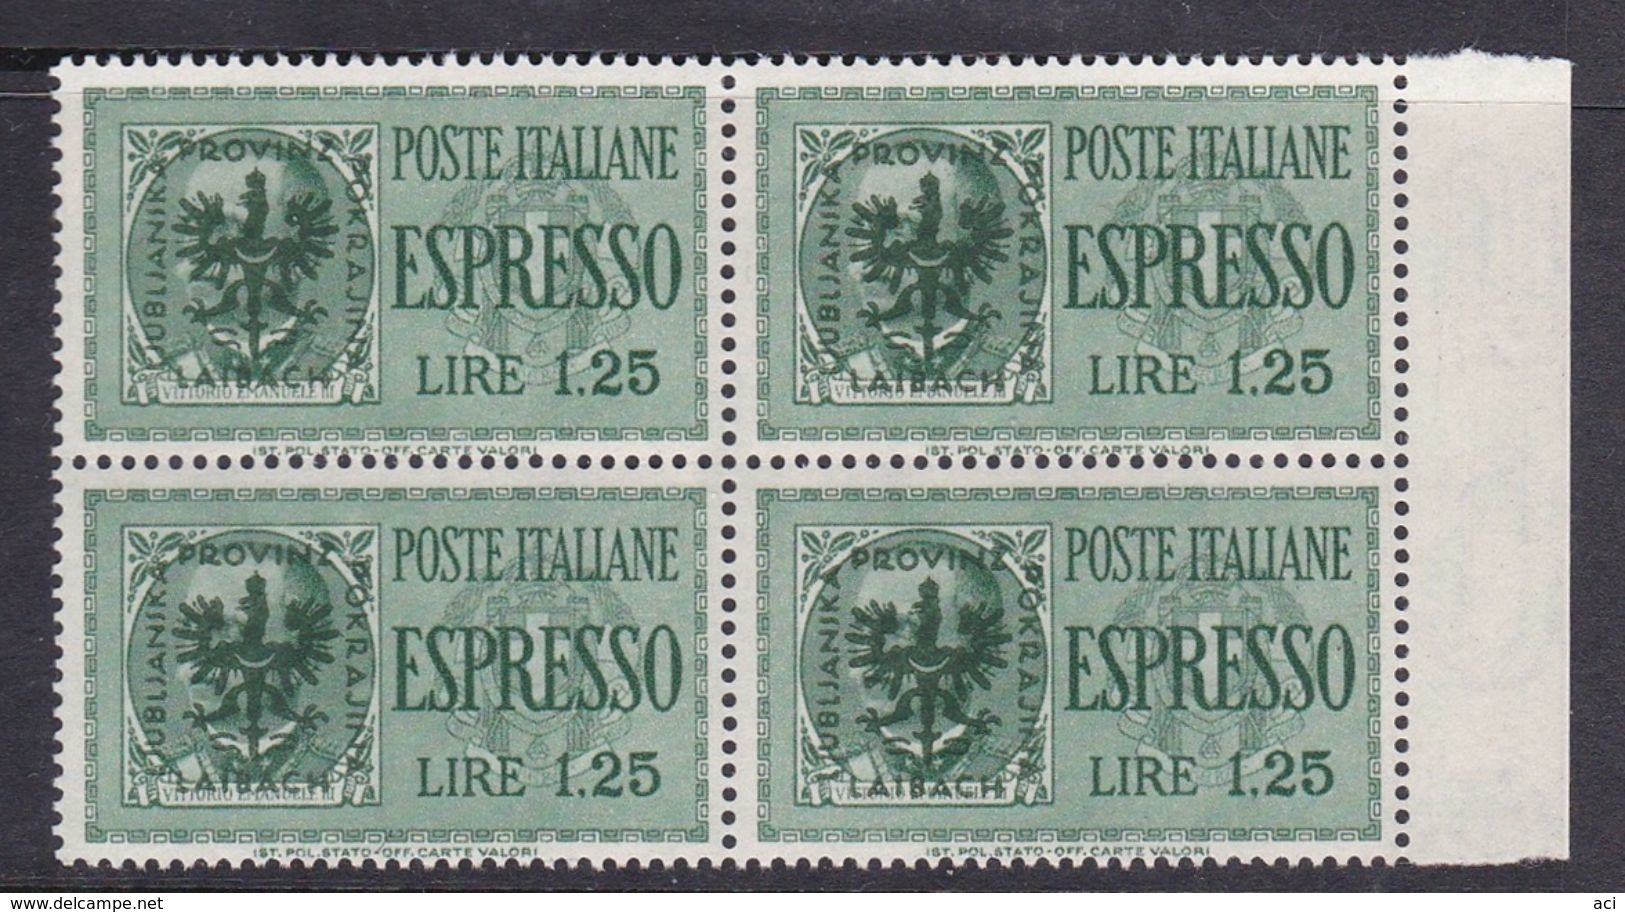 Italy-WW II Occupation-German Occupation Of Lubiana, E 4 1944 Special Delivery Stamp, Lire 1,25 Green Block 4 MNH - German Occ.: Lubiana